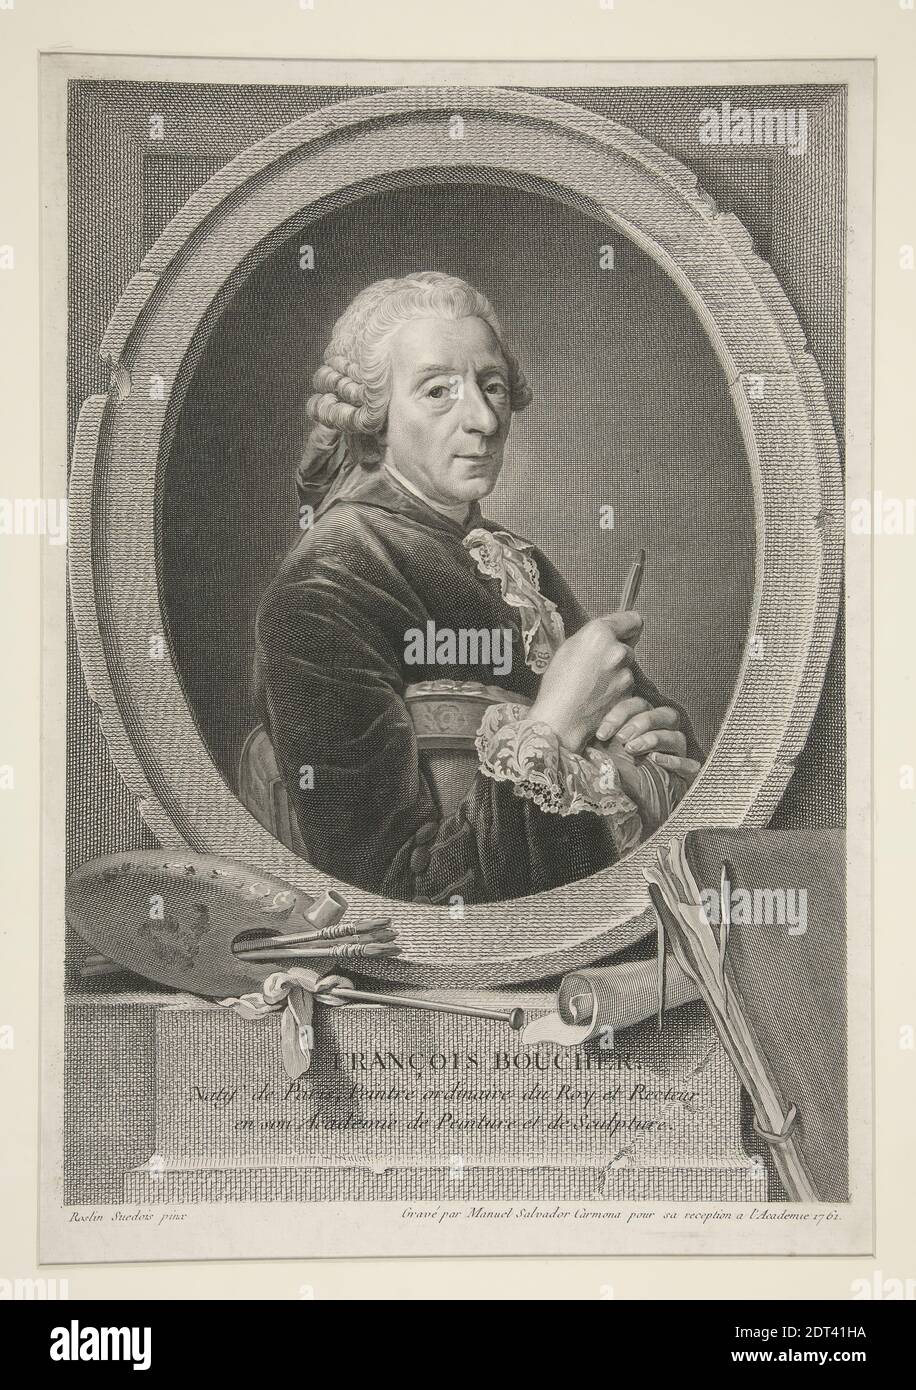 Artist: Manuel Salvador Carmona, Spanish, 1734–1820, Portrait of François Boucher, Engraving, 37.9 × 26 cm (14 15/16 × 10 1/4 in.), Made in Spain, Spanish, 18th–19th century, Works on Paper - Prints Stock Photo